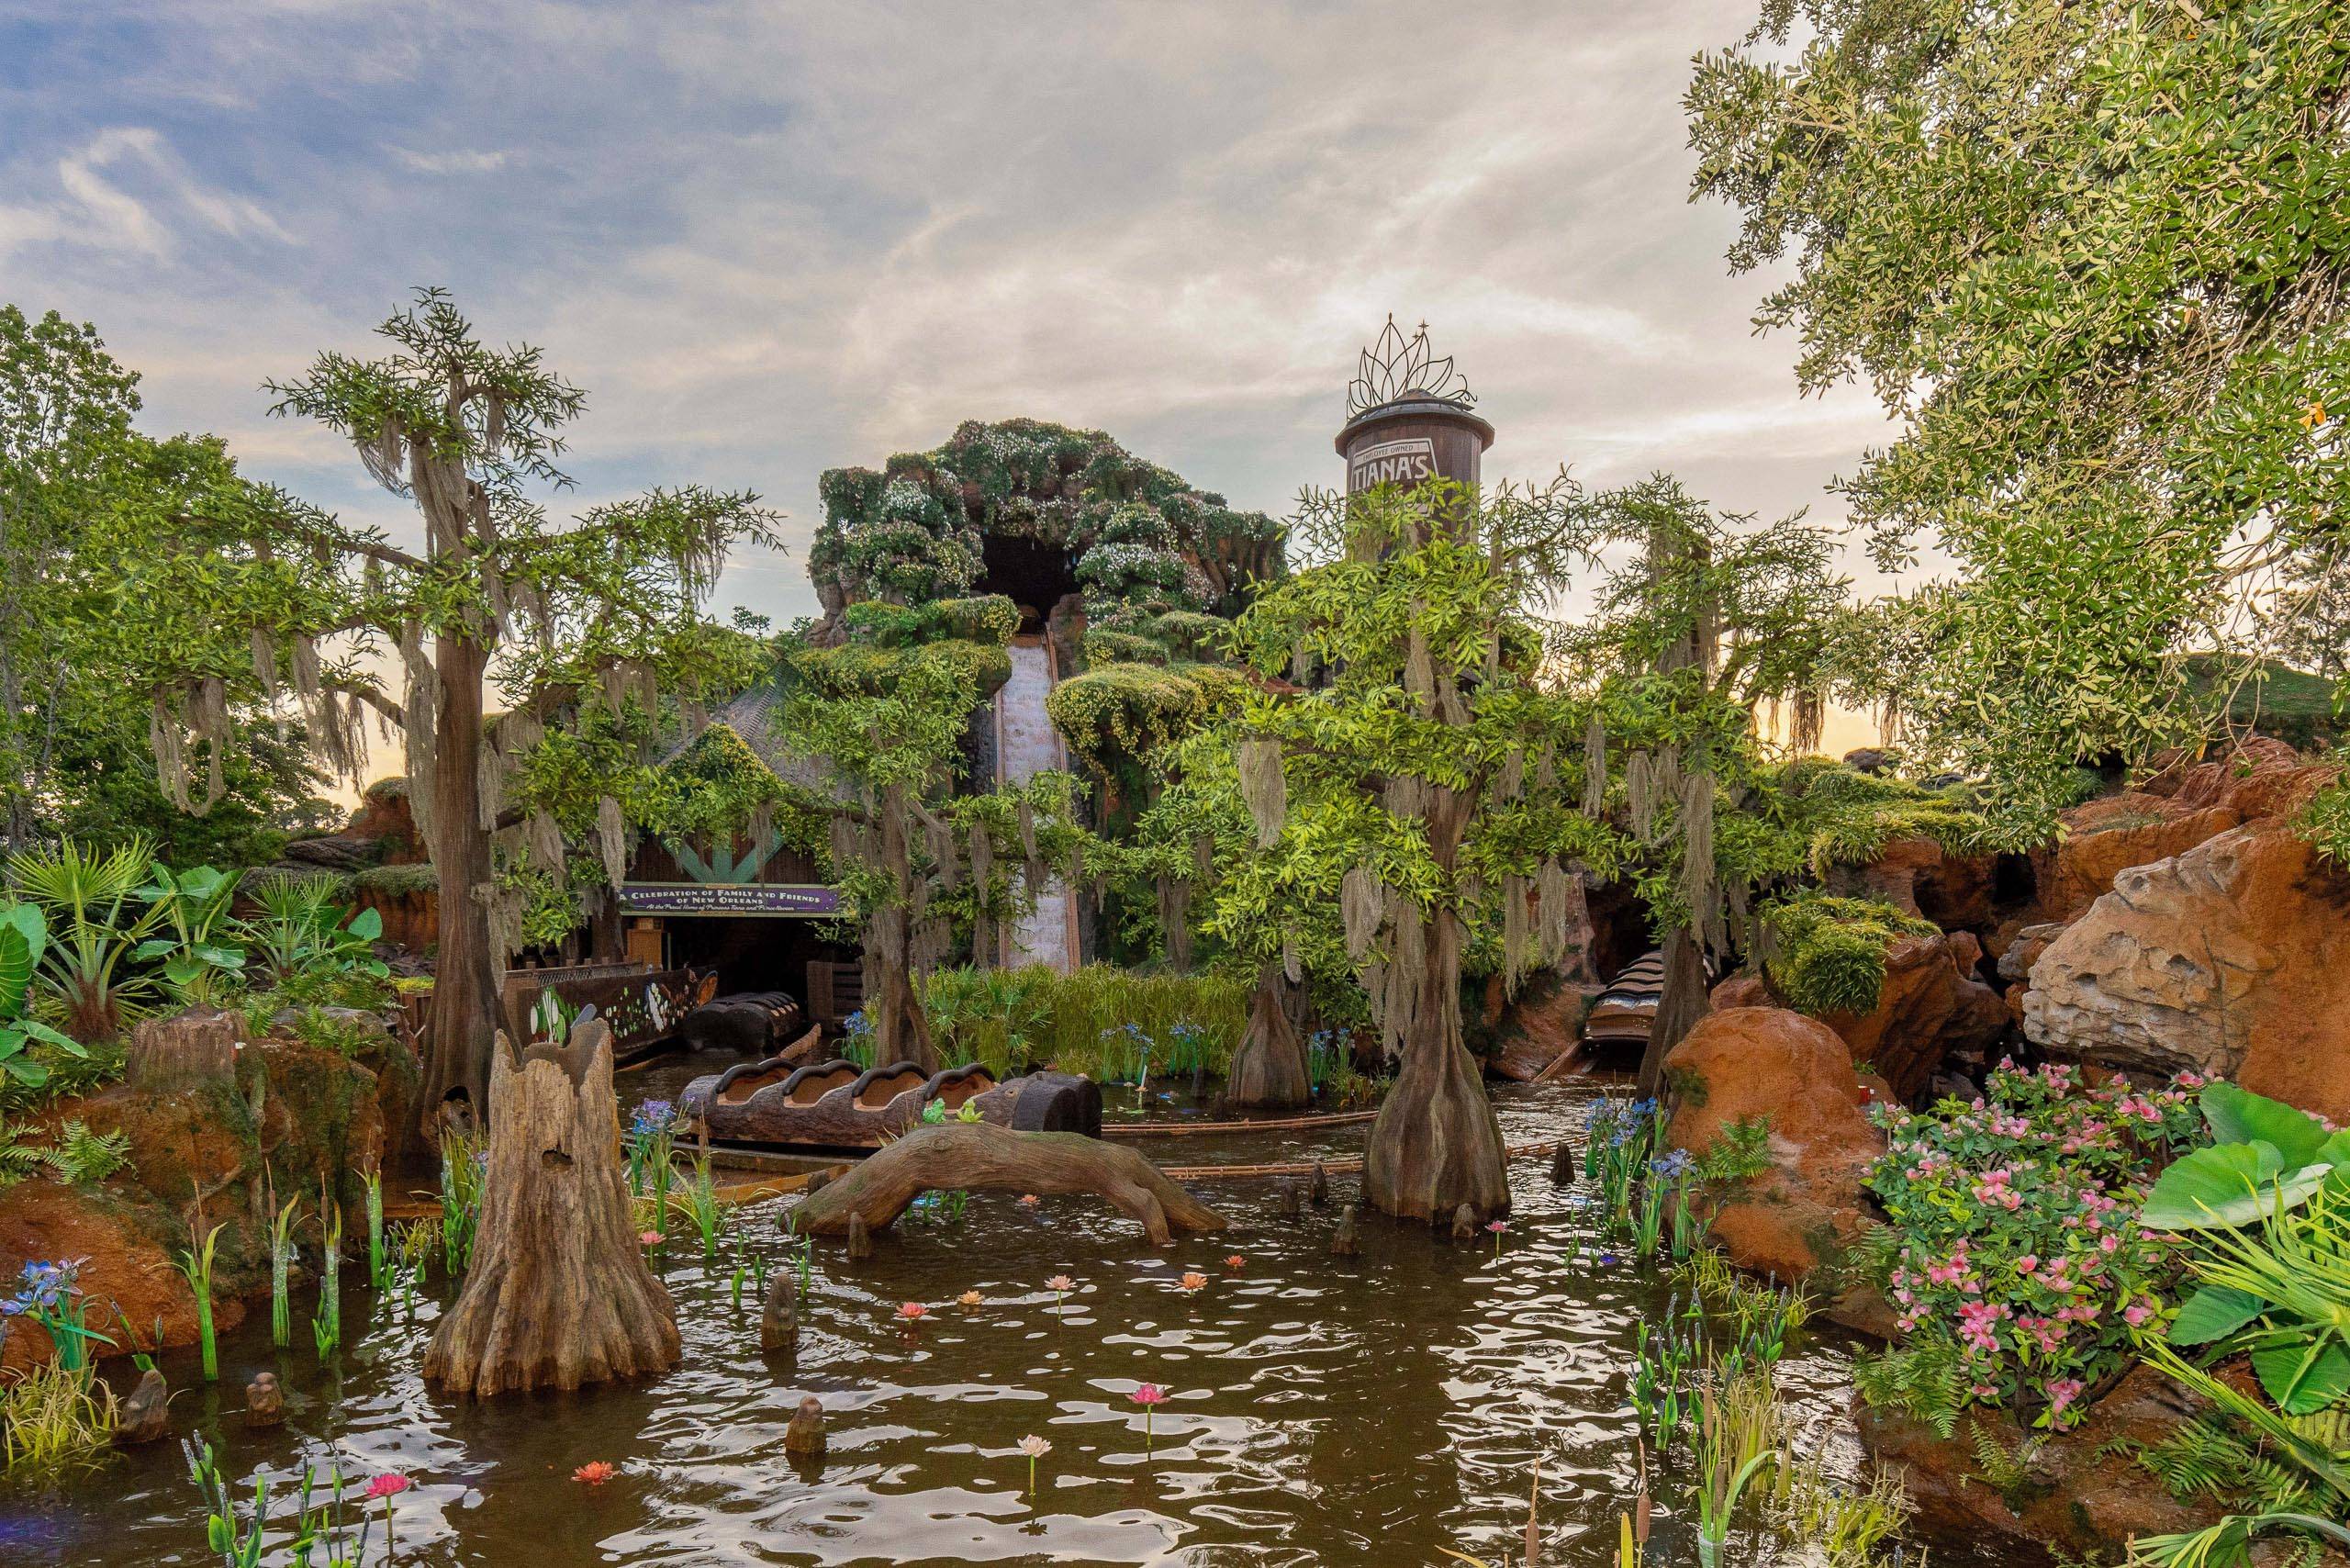 Previews will begin soon for Magic Kingdom's new Tiana's Bayou Adventure attraction